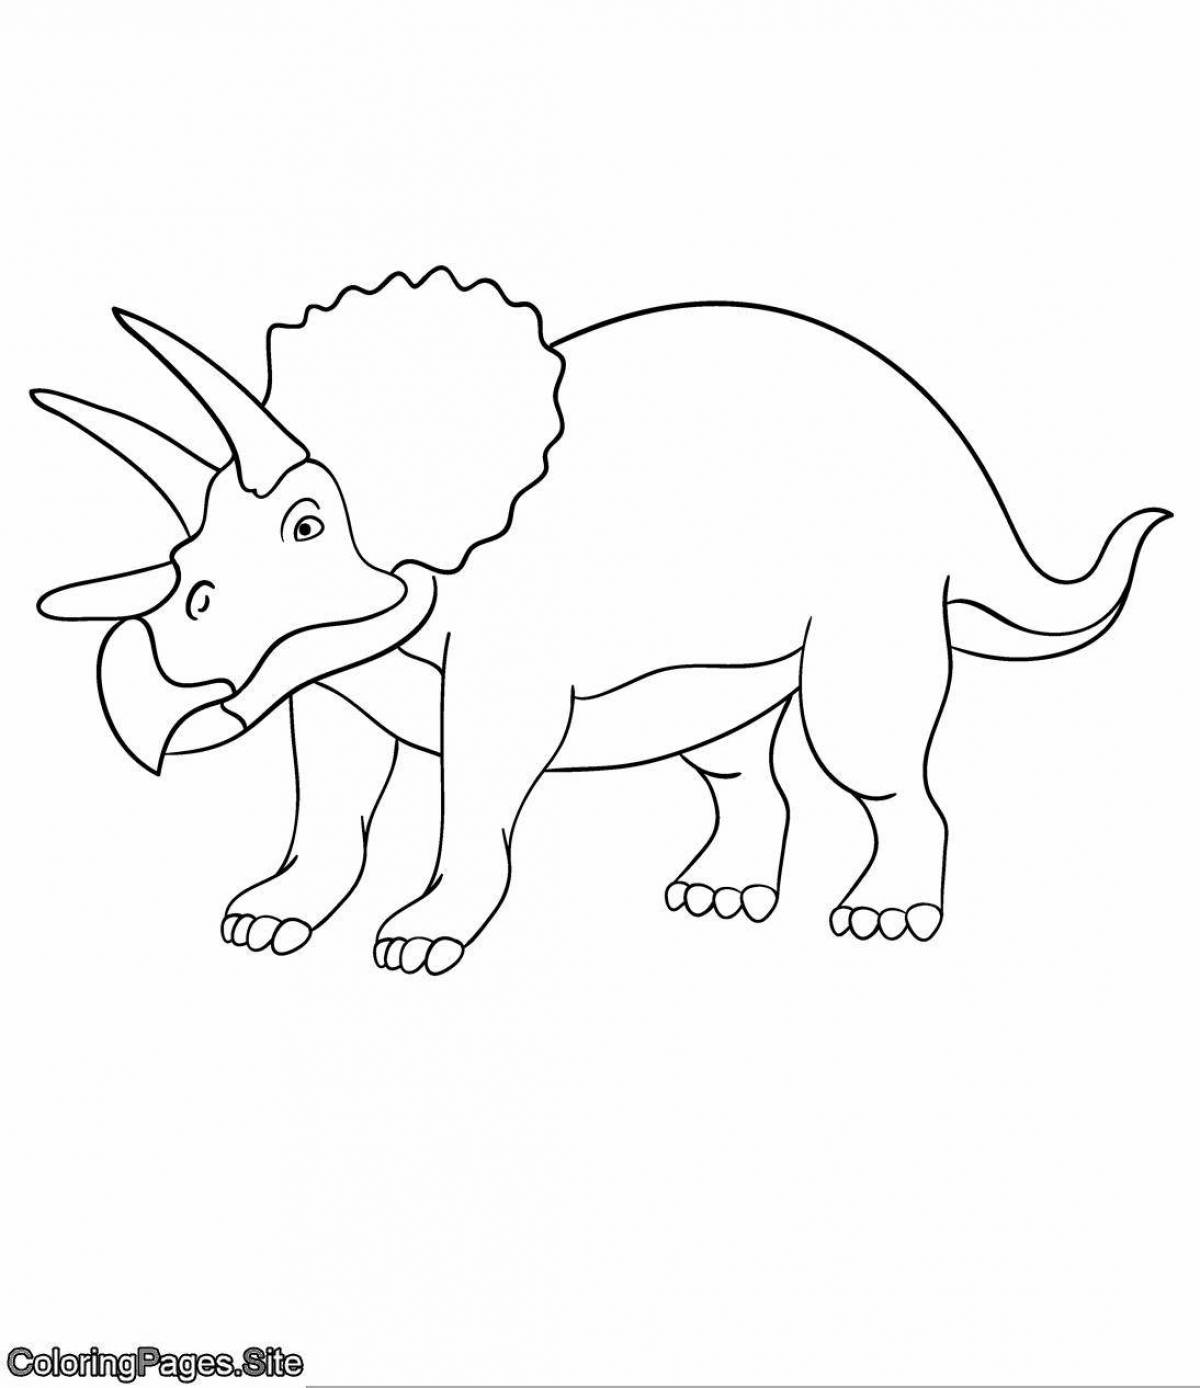 Adorable Triceratops Dinosaur Coloring Page